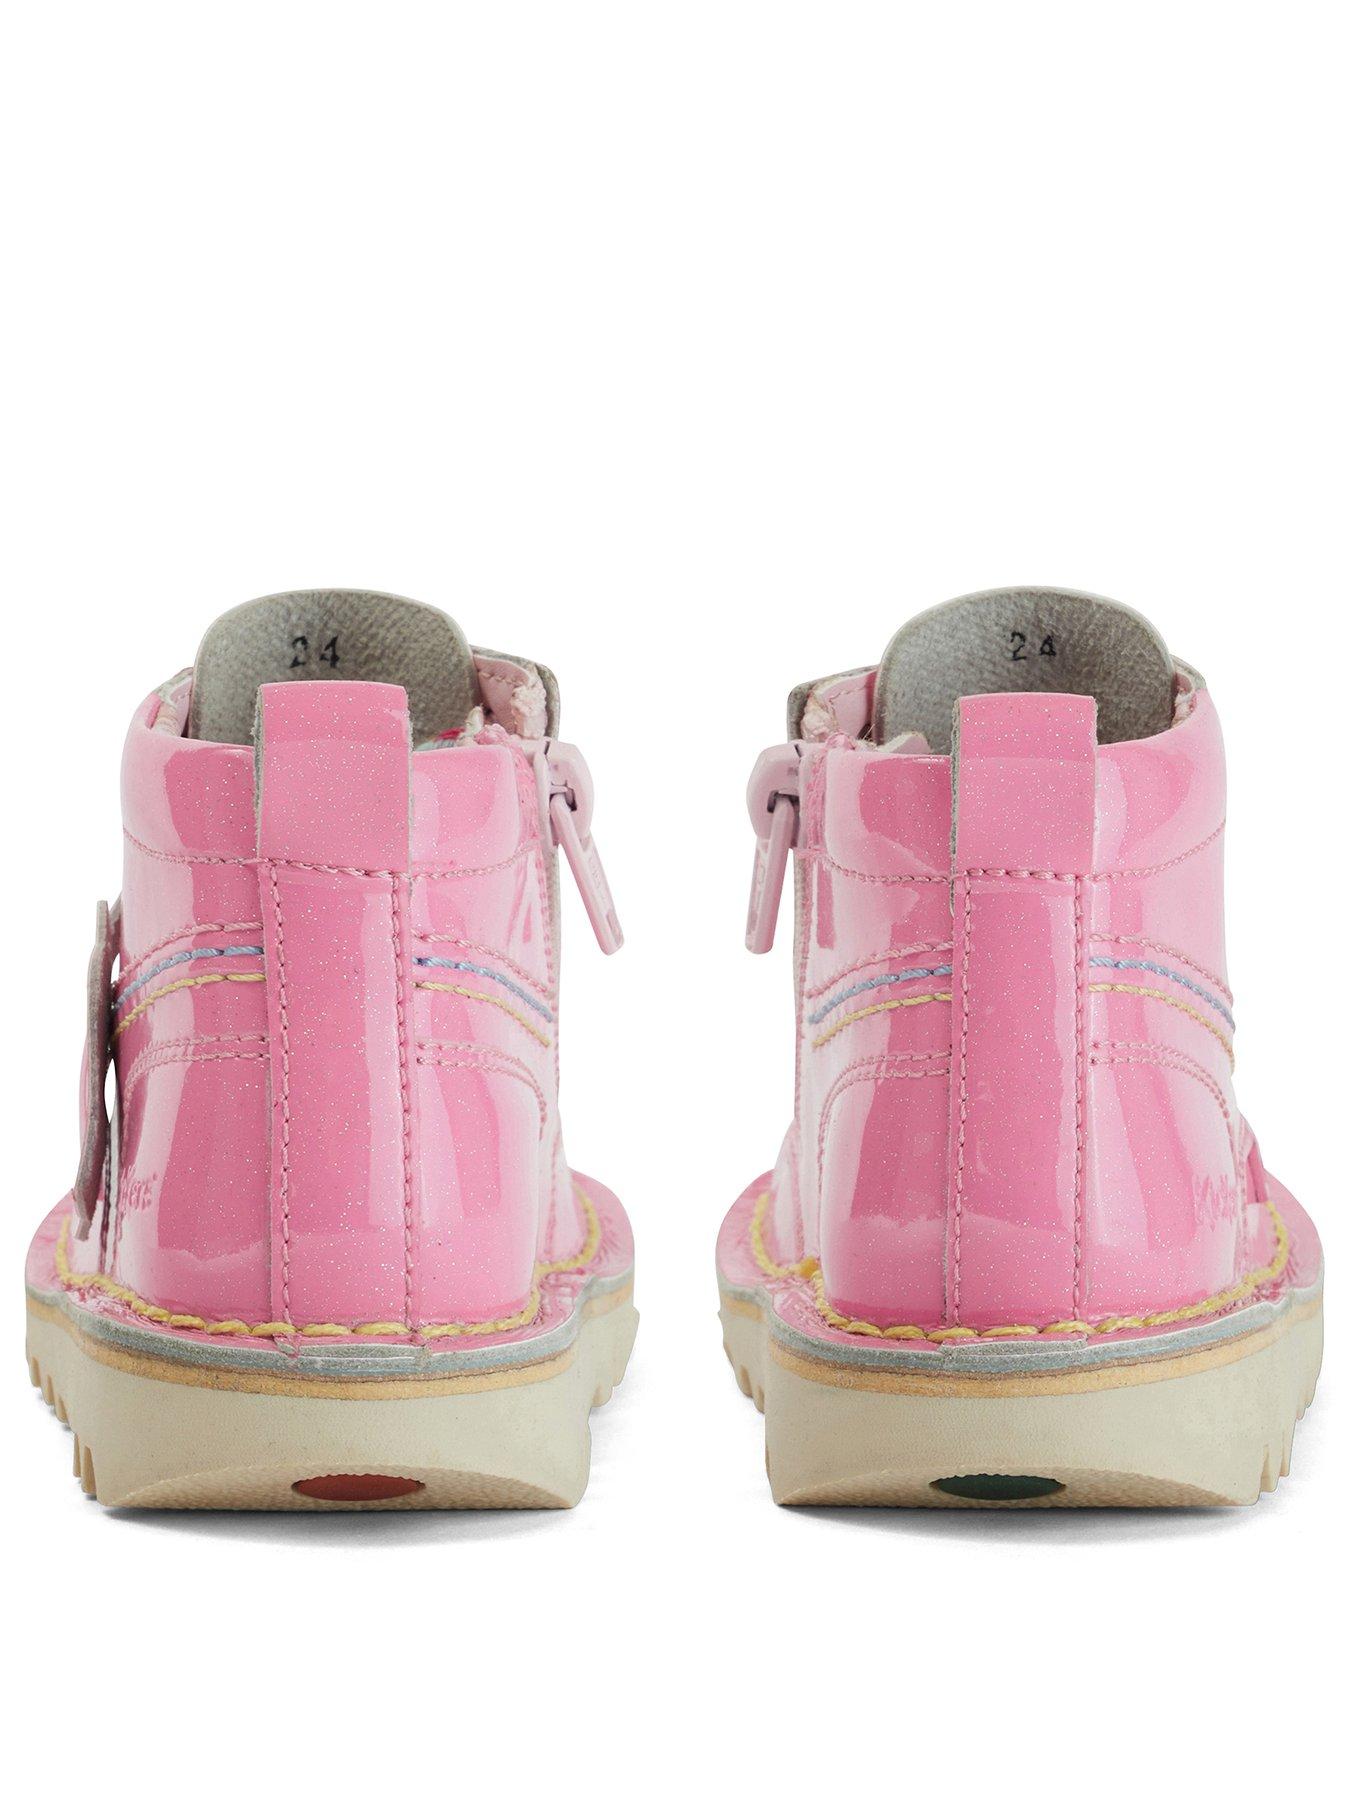  Kickers Toddler Kick Fleur Patent Leather Boot